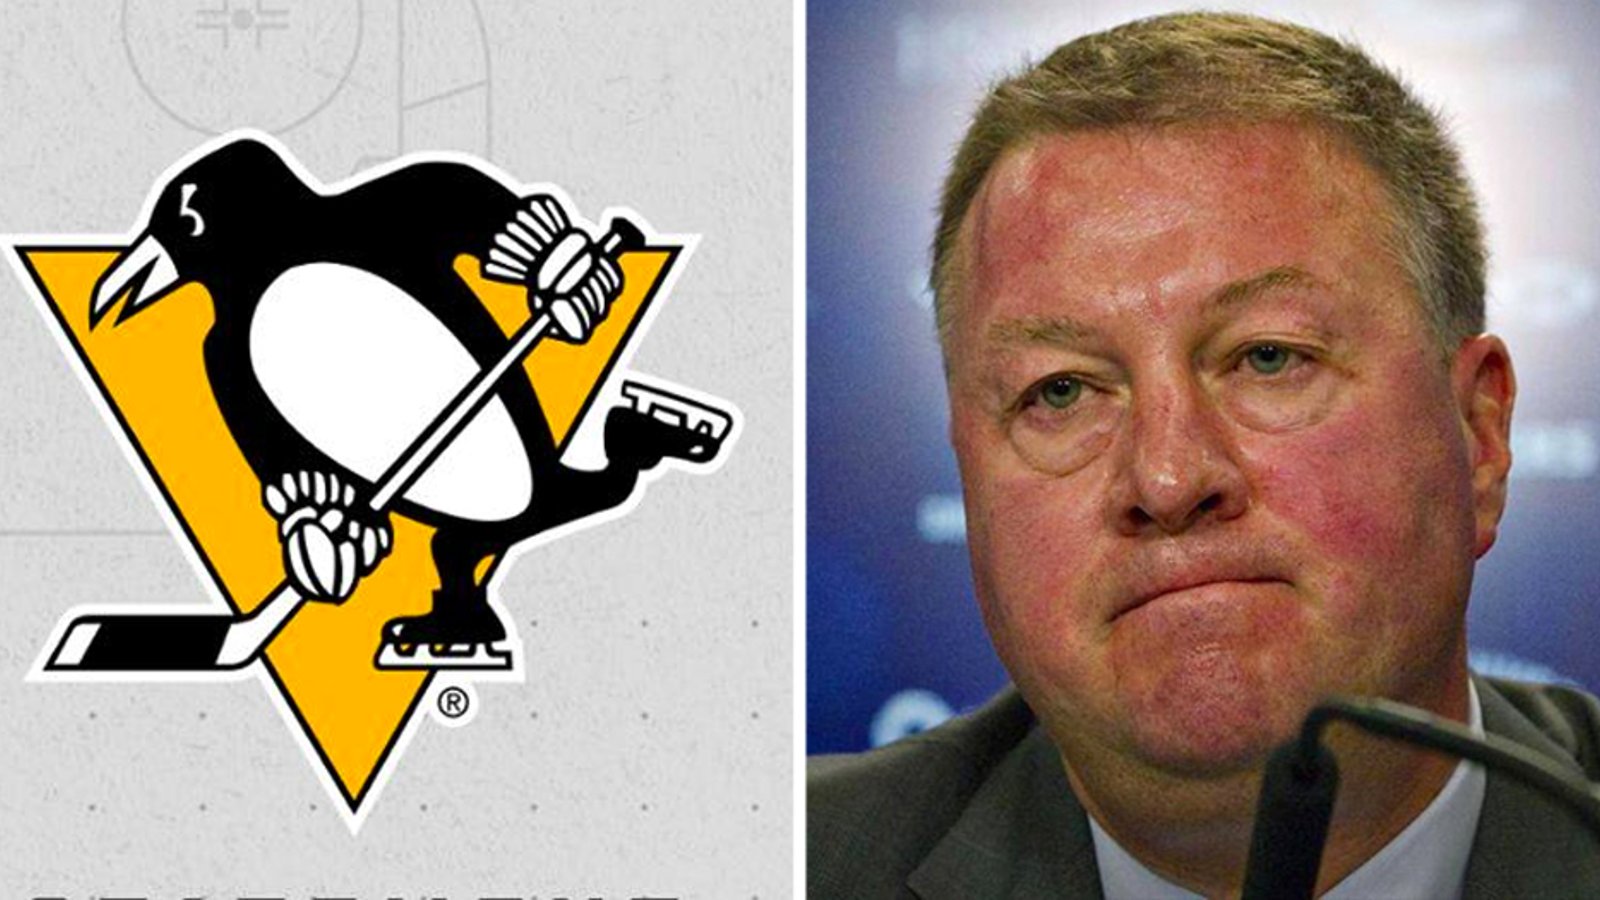 Former Canucks GM Mike Gillis applies for Penguins job, has his entire proposal and resume leaked online